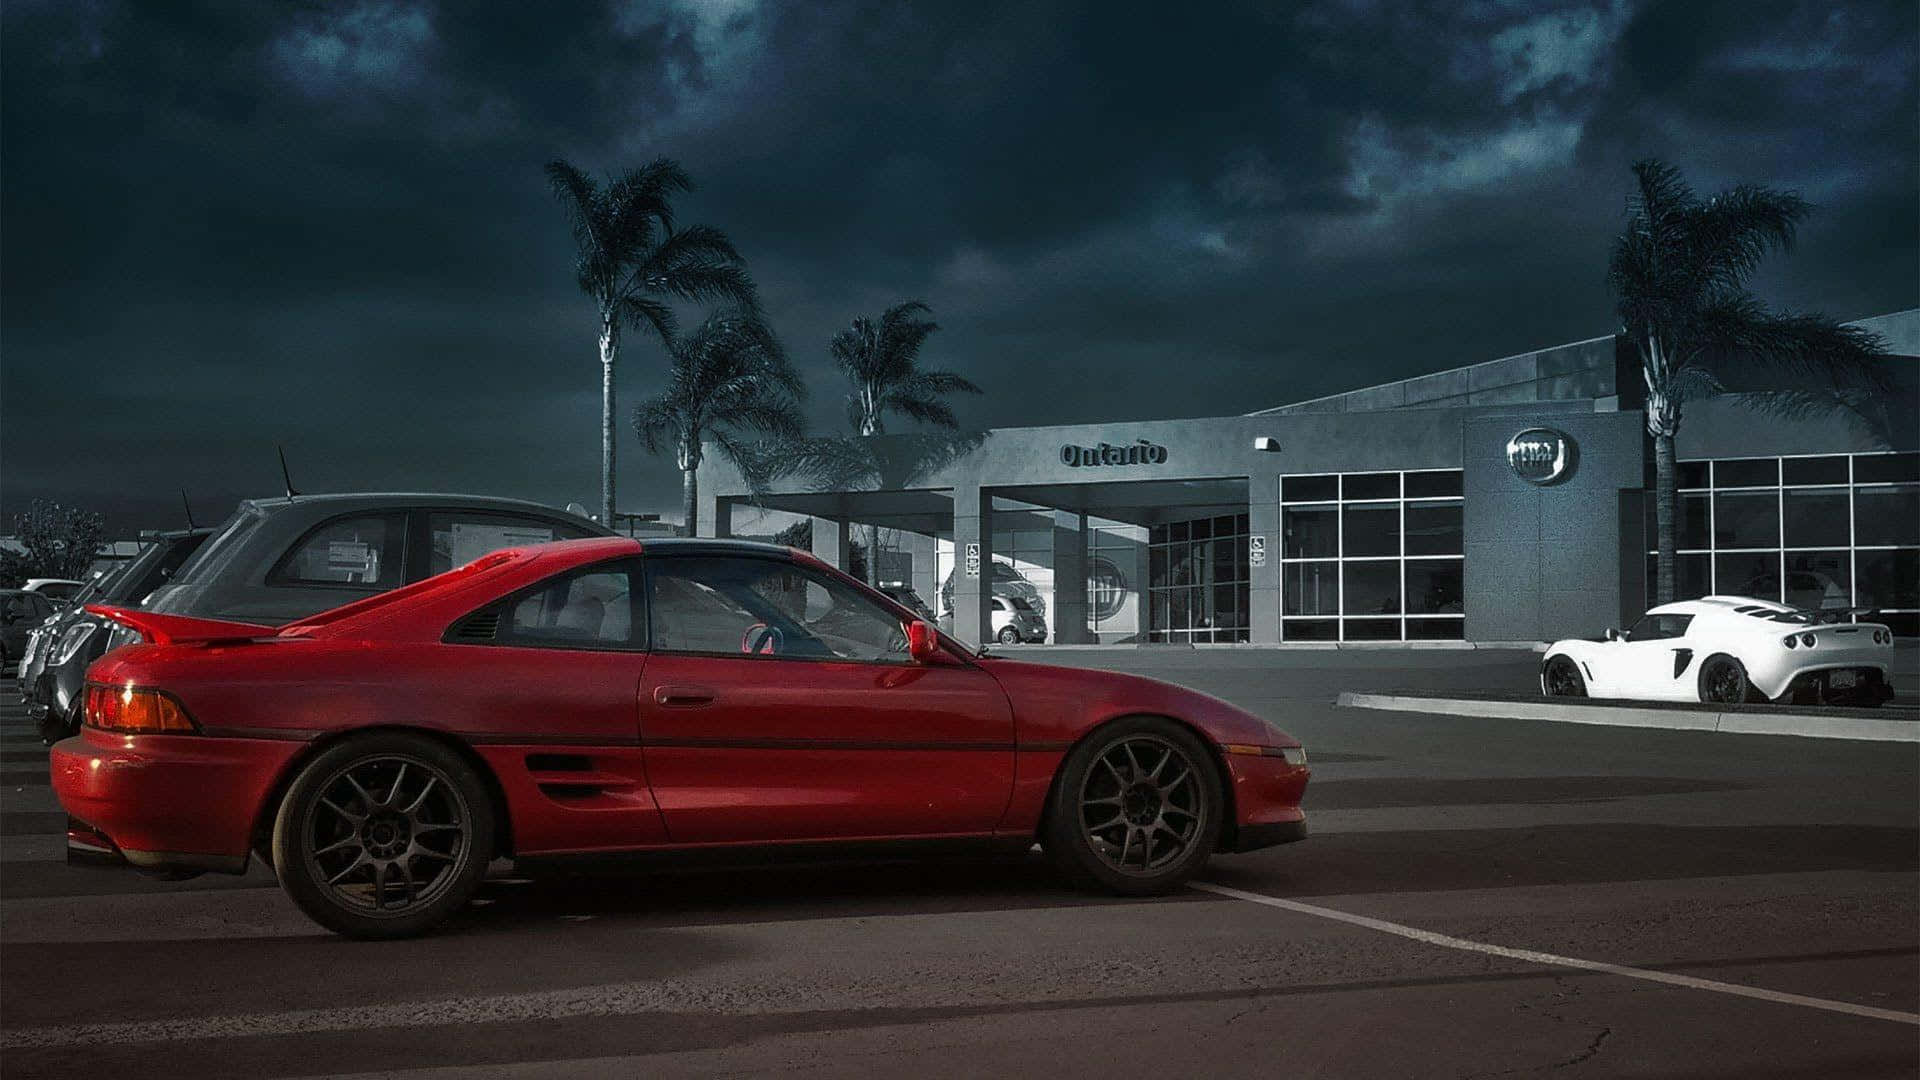 Stunning Picture Of A Vintage Toyota Mr2 Wallpaper